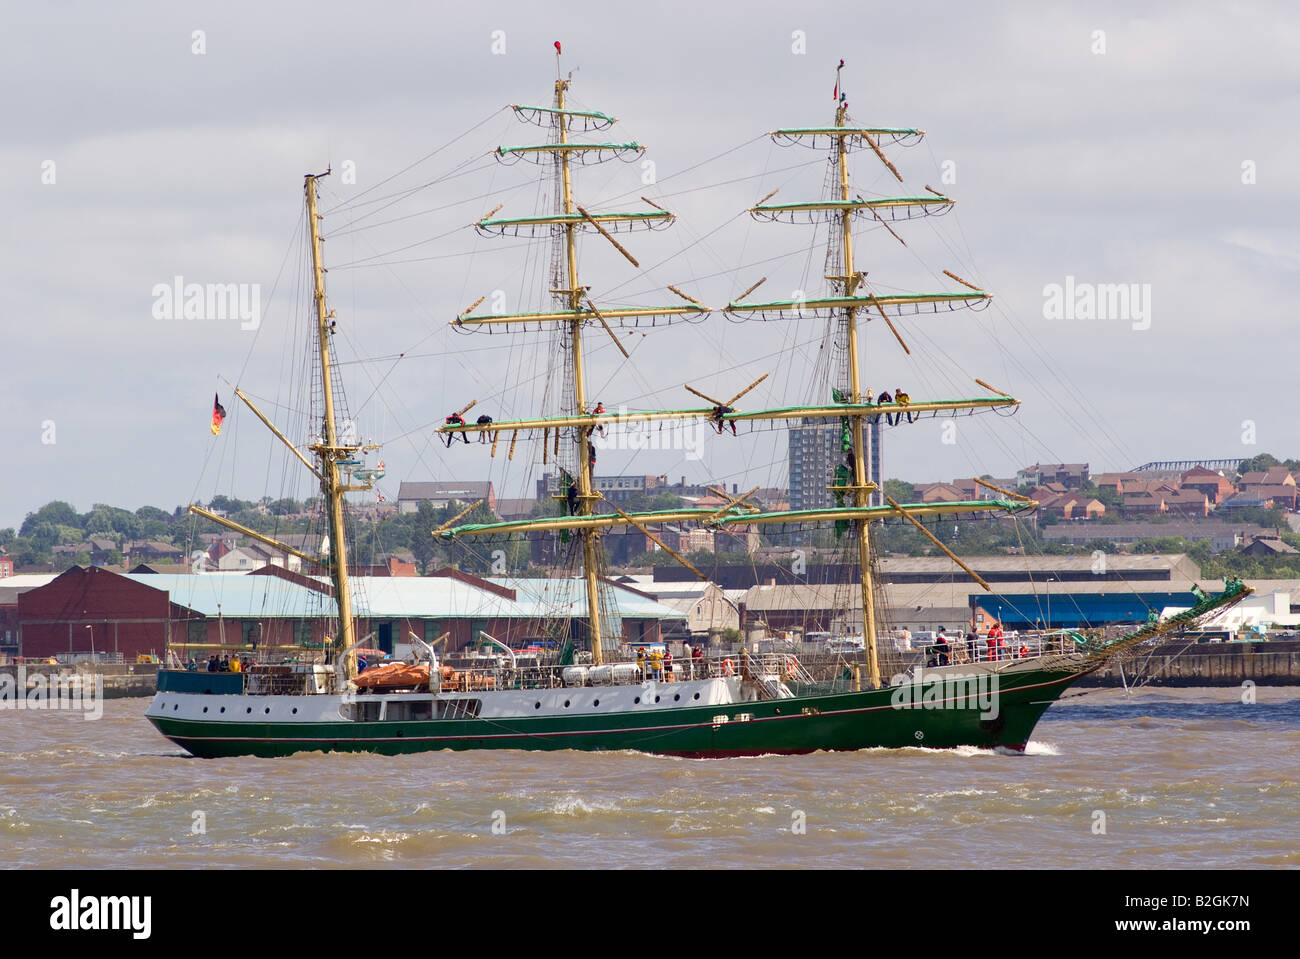 The Tall Ship Alexander Von Humboldt on Her Way to the Start of the Tall Ships Race River Mersey Liverpool England 2008 Stock Photo